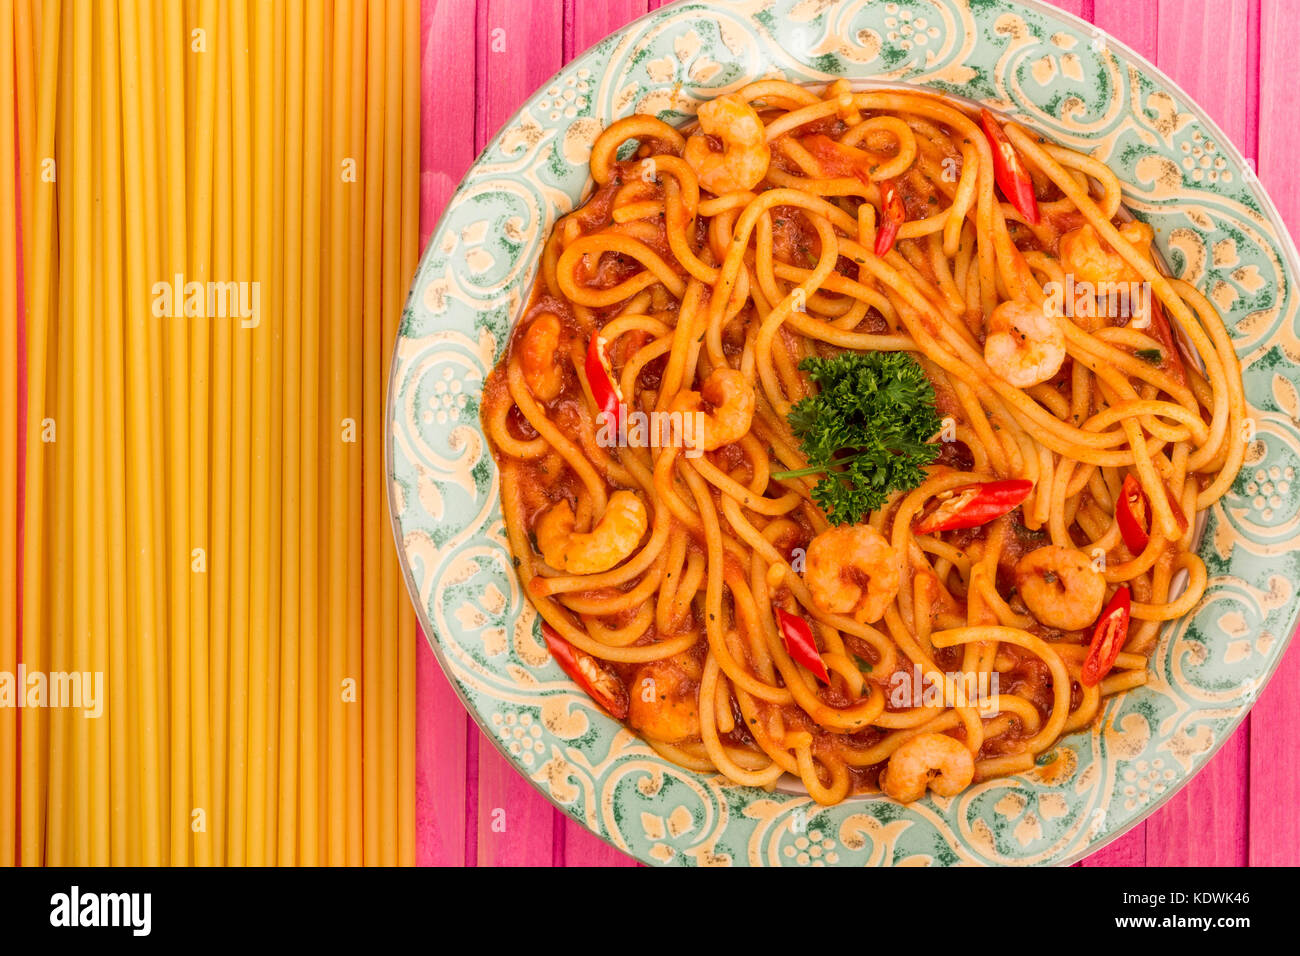 Italian Style Spicy Prawn or Shrimp Spaghetti In A Chilli Tomato Sauce On A Pink Wooden Background Stock Photo